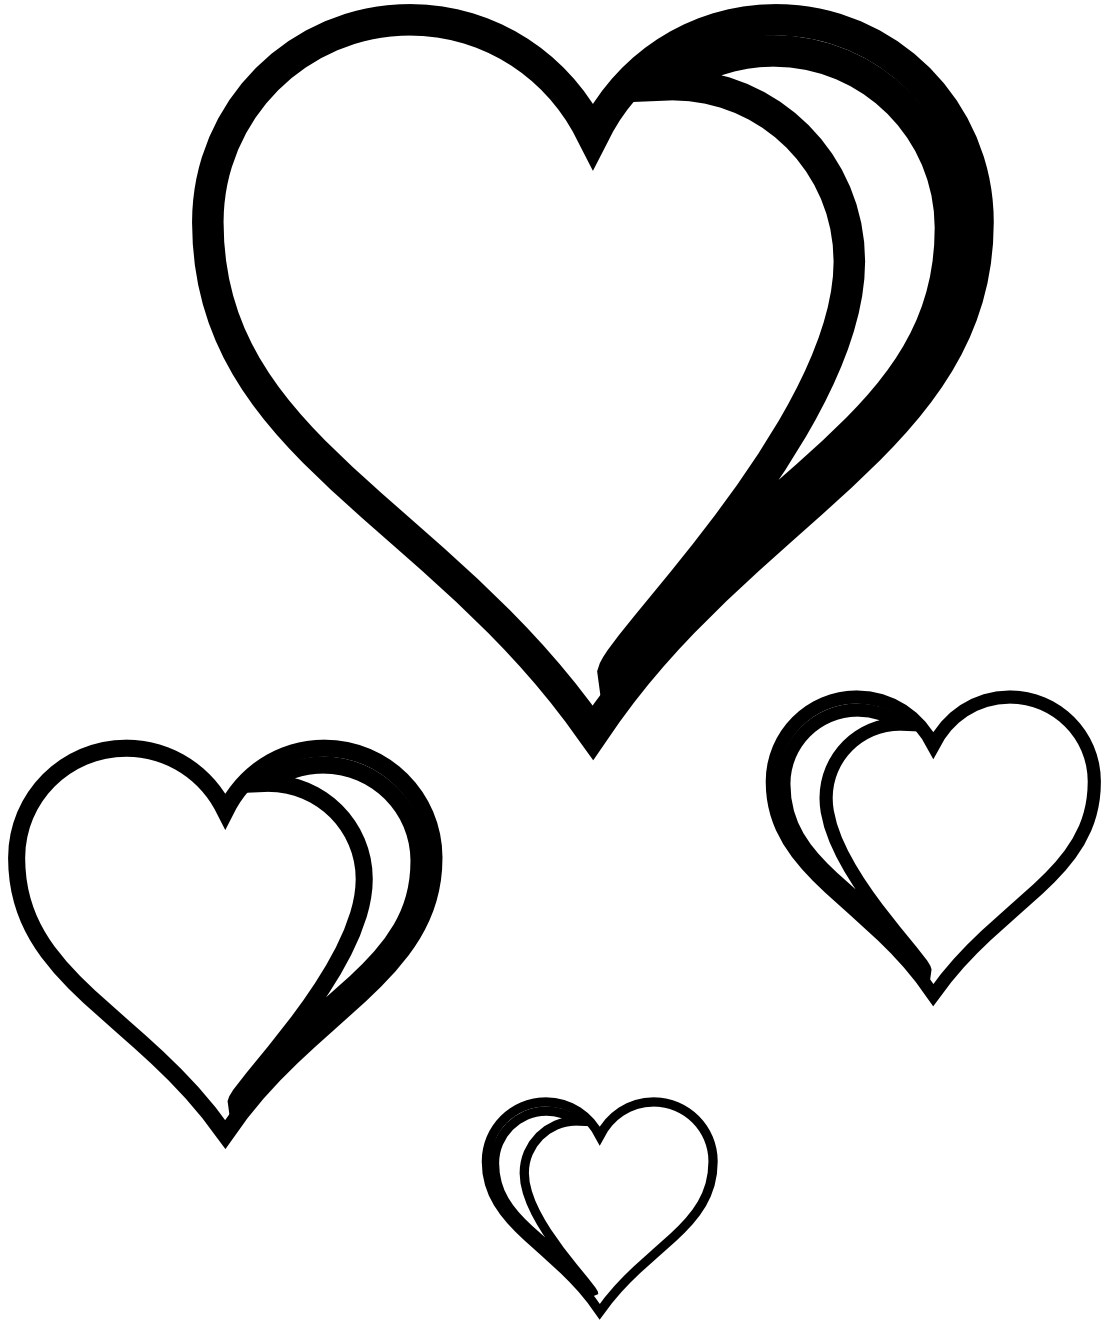 Hearts clipart black and white